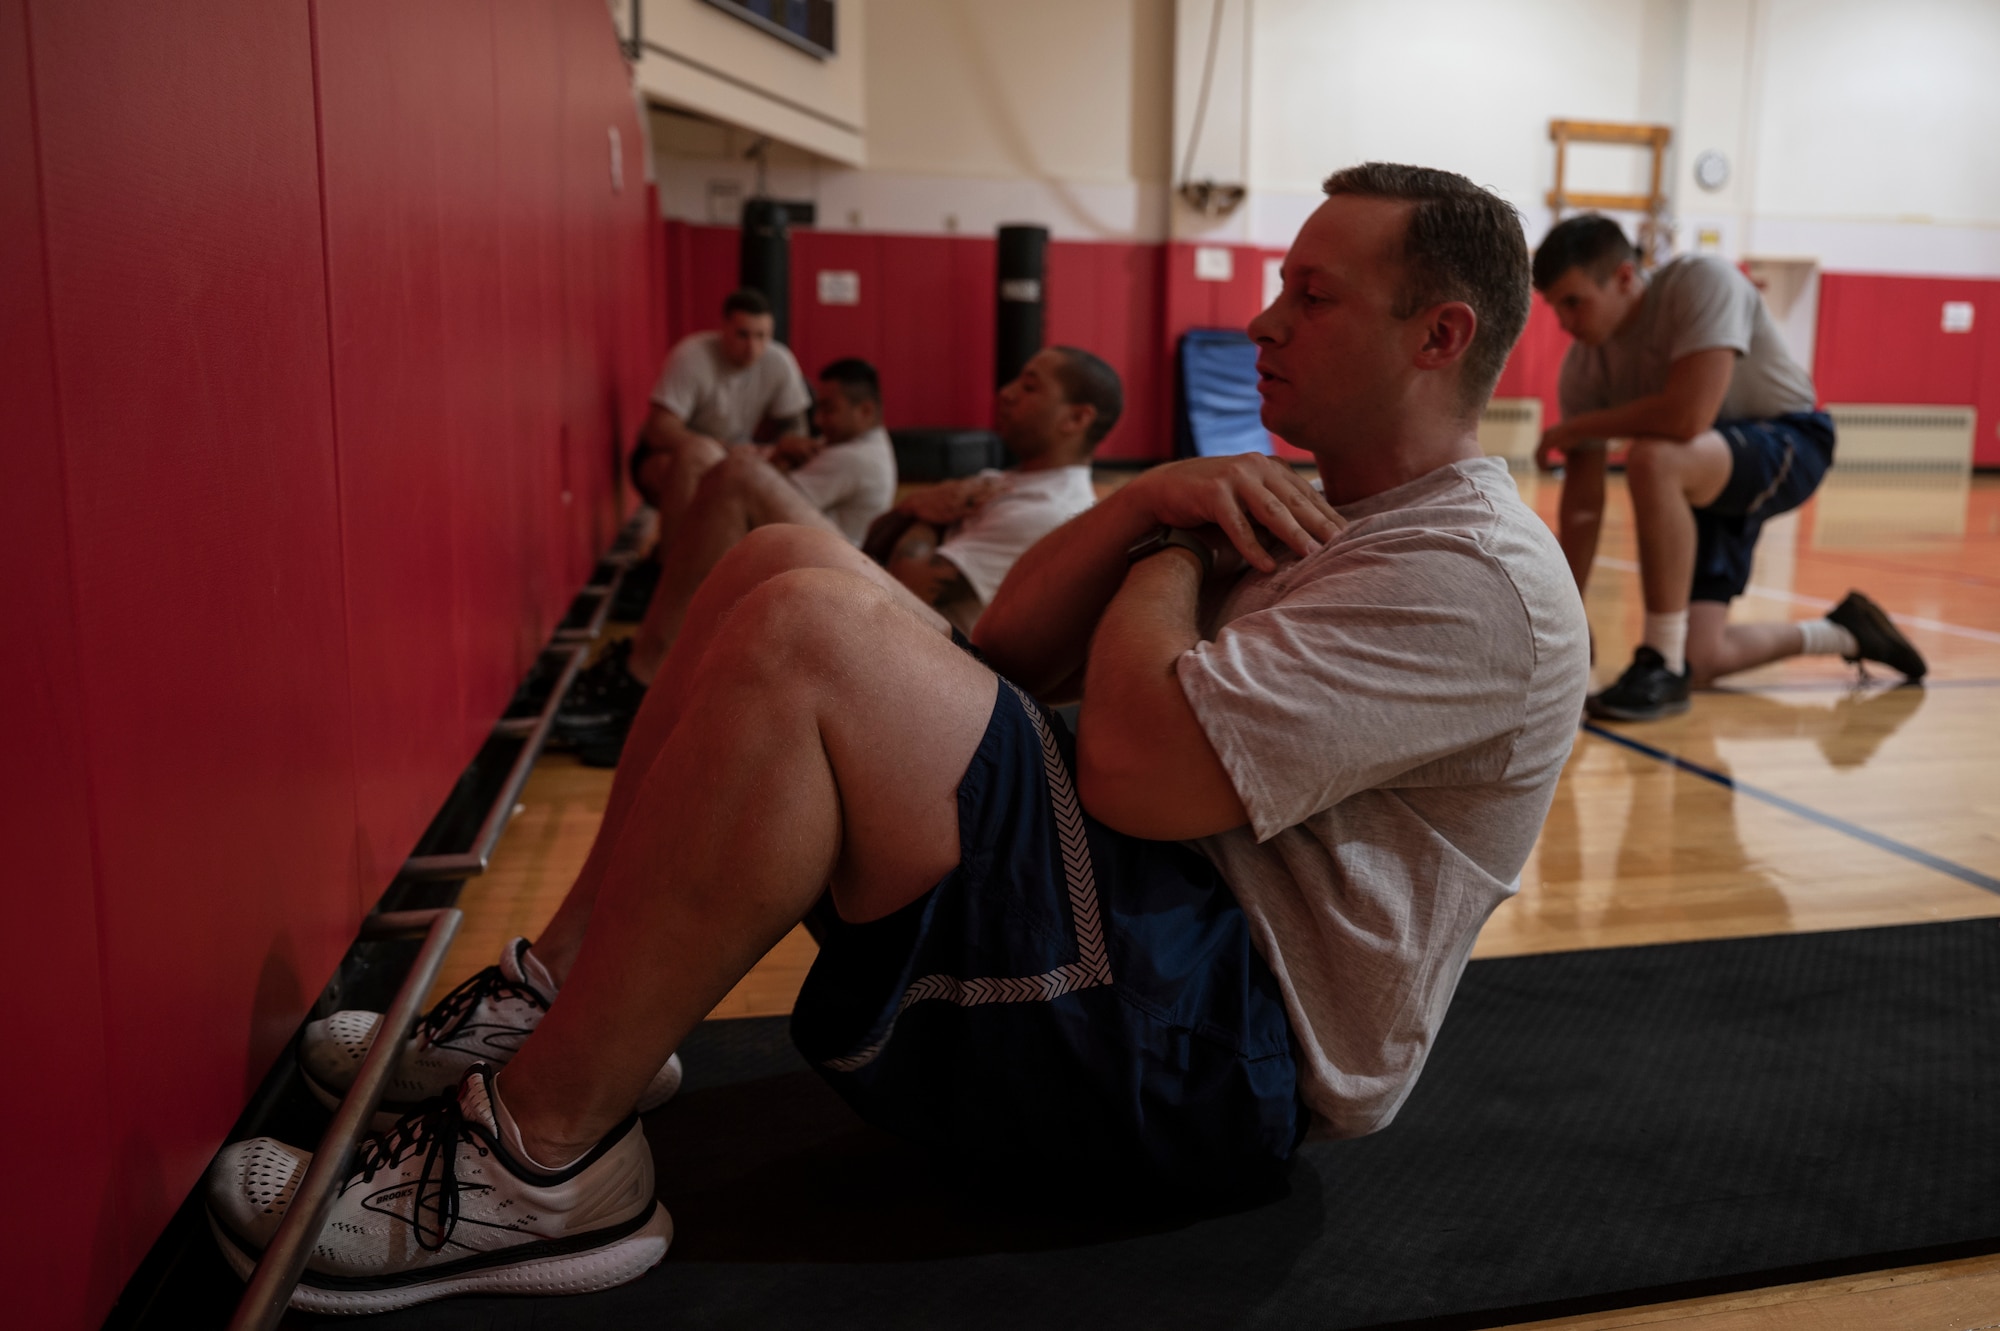 Master Sgt. Joseph Bridge, 911th Airlift Wing finance technician, performs a sit-up as during a physical fitness test at the Pittsburgh International Airport Air Reserve Station, Pennsylvania, July 29, 2021. The U.S. Air Force started conducting physical fitness tests with some changes to the standards after a brief hiatus due to COVID-19.